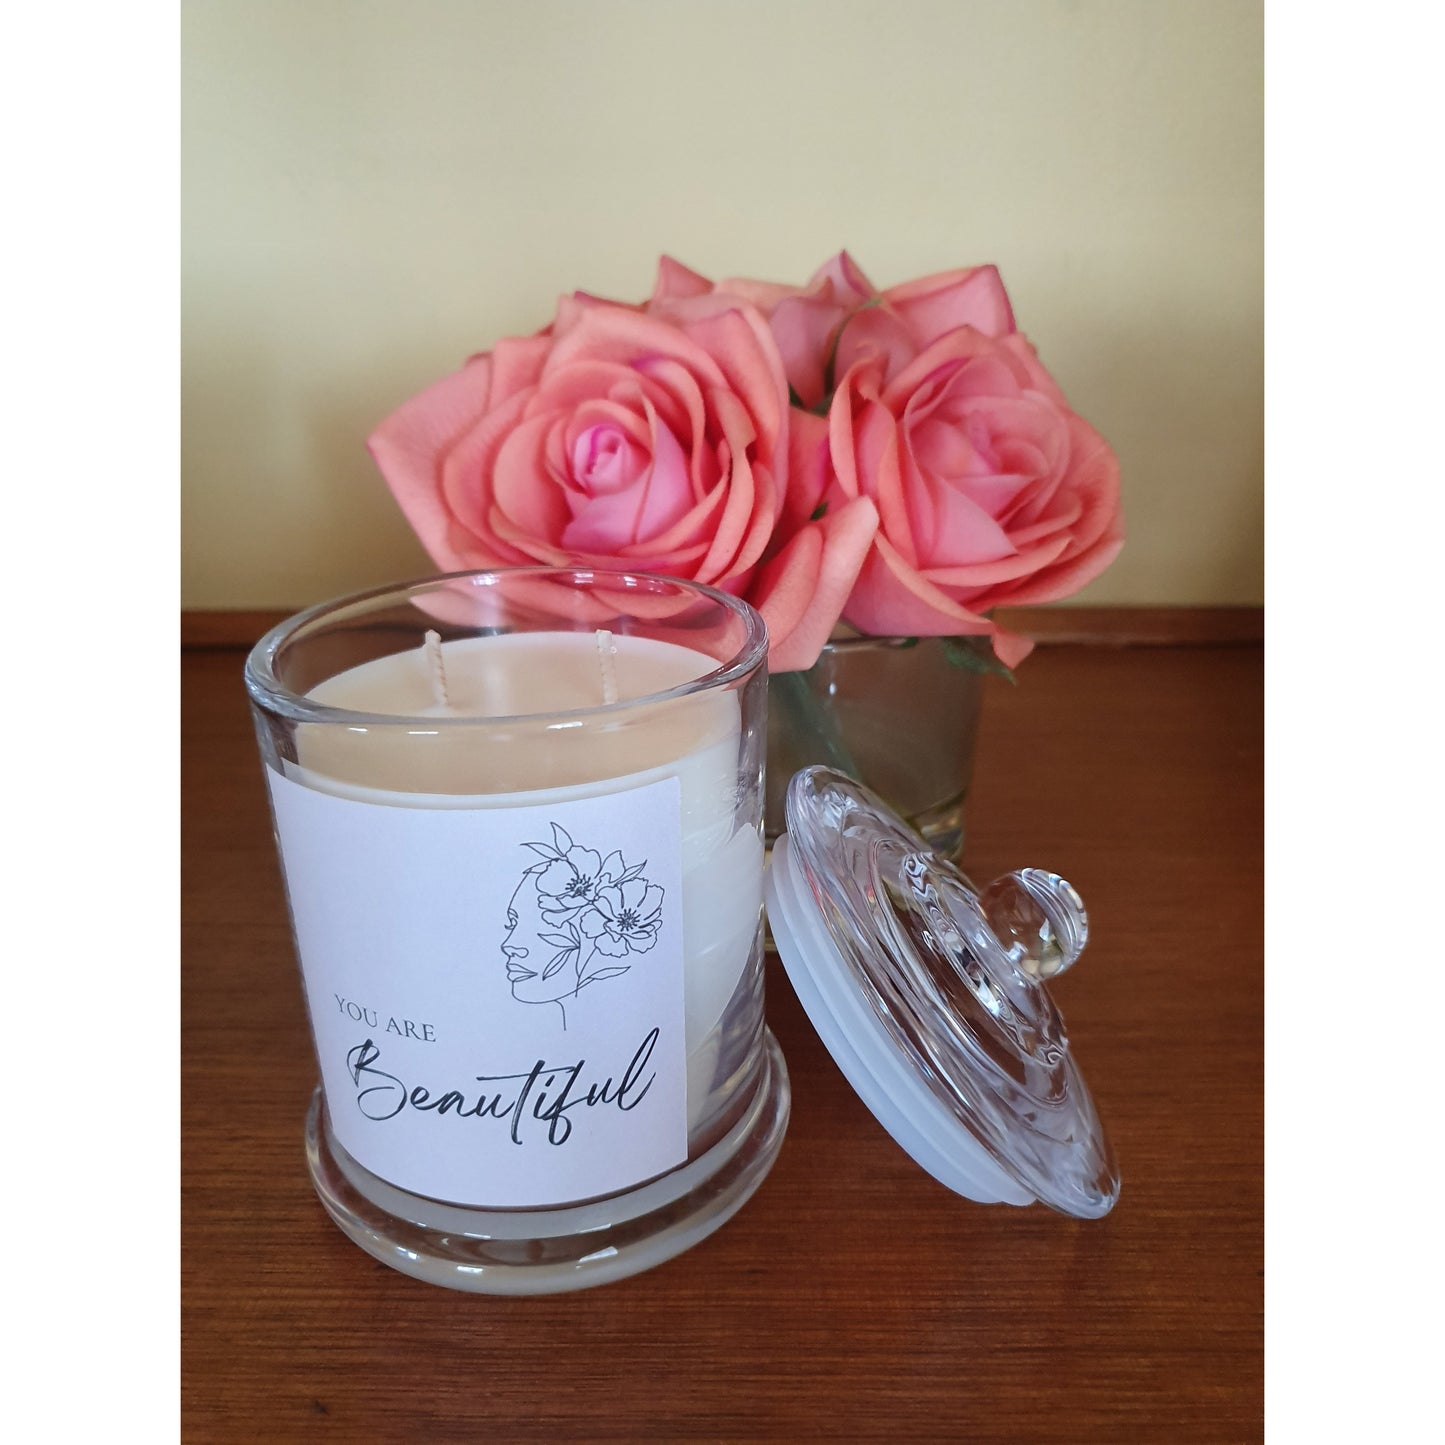 Inspirational Quote Candle - You are Beautiful